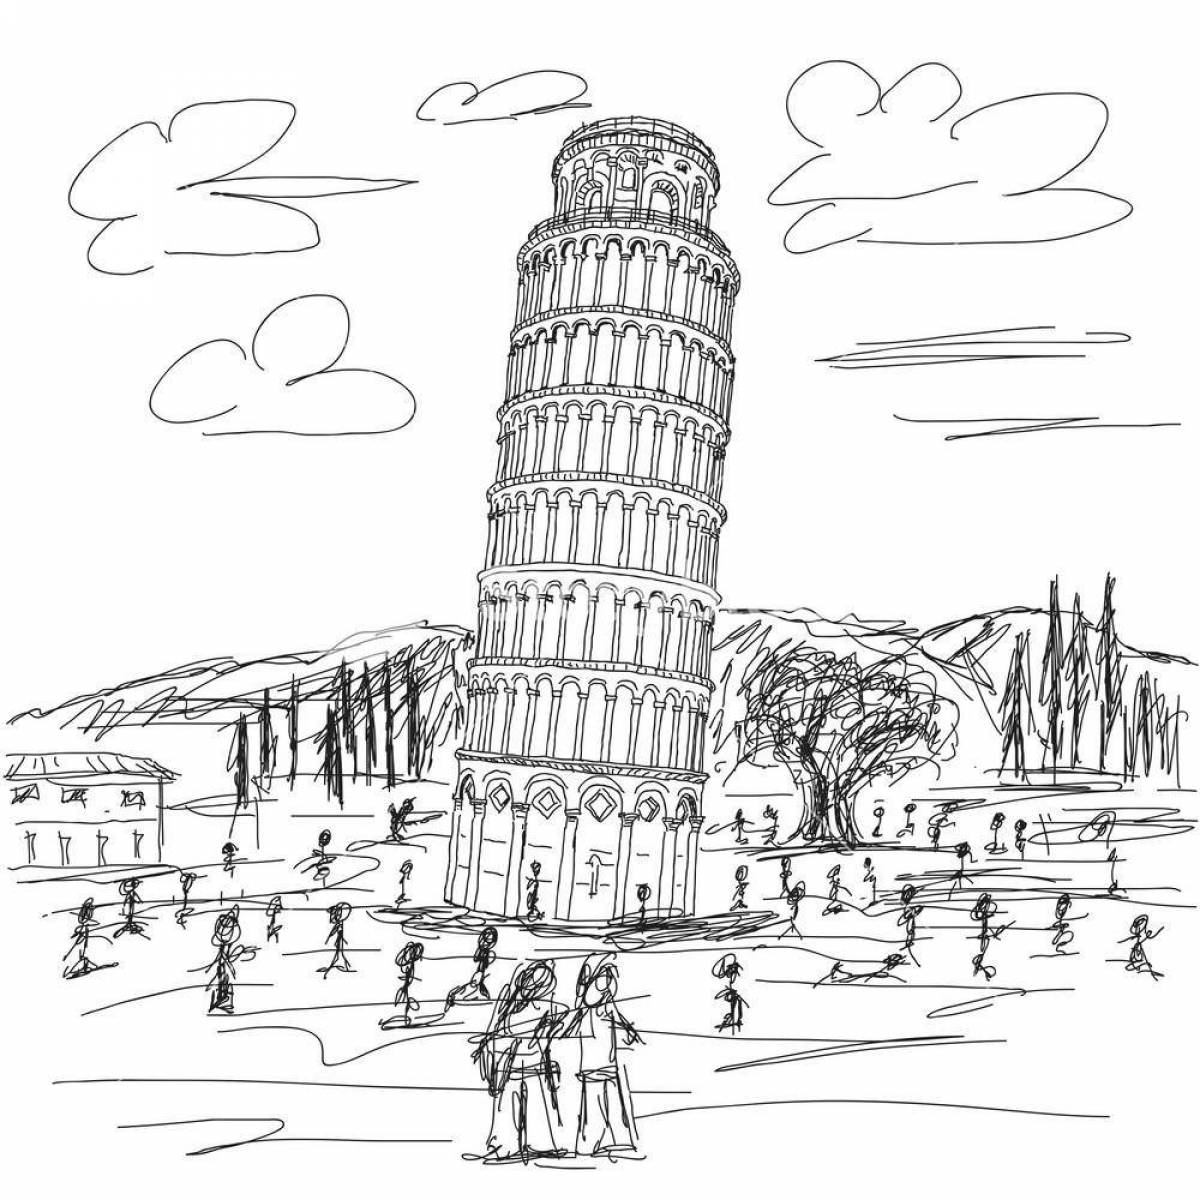 Leaning Tower of Pisa #1